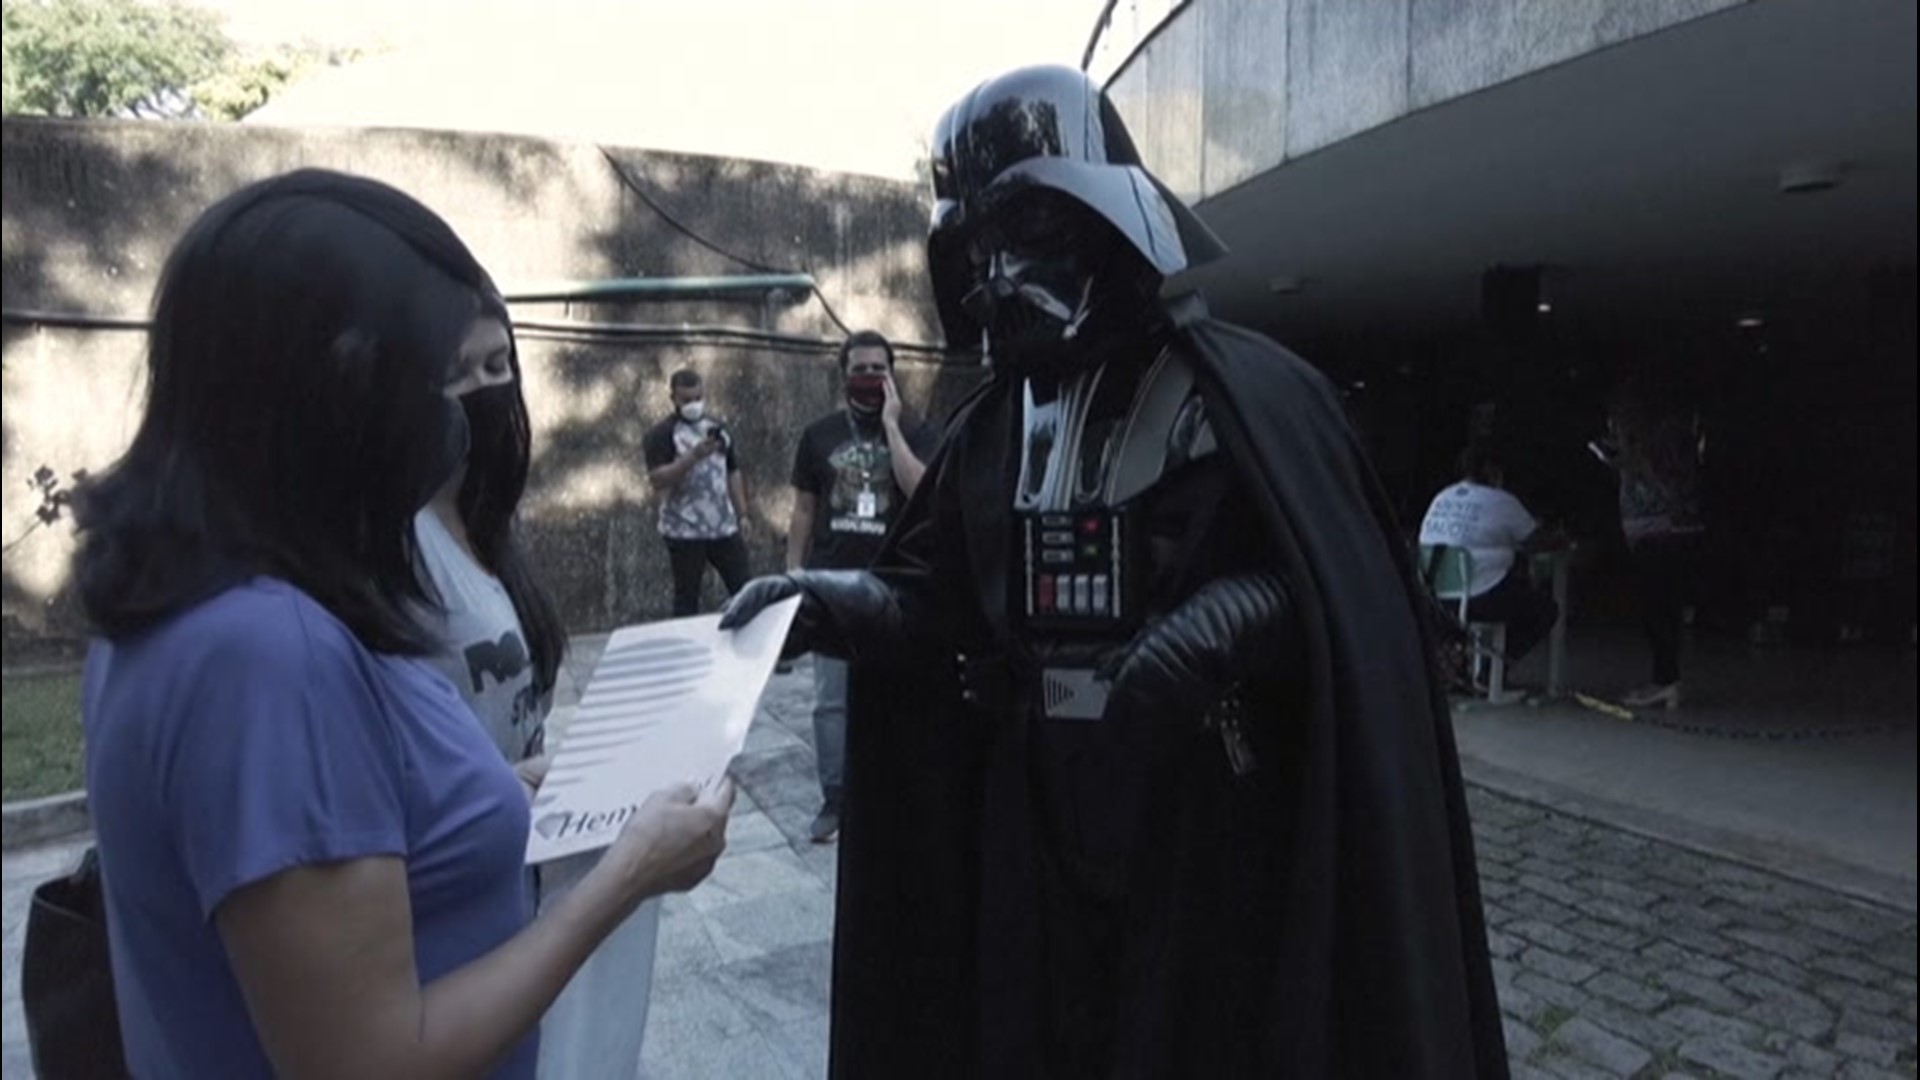 An actor dressed as Darth Vader encouraged and congratulated people waiting in line for their COVID-19 vaccination in Rio De Janeiro, Brazil, for Star Wars Day, May 4.